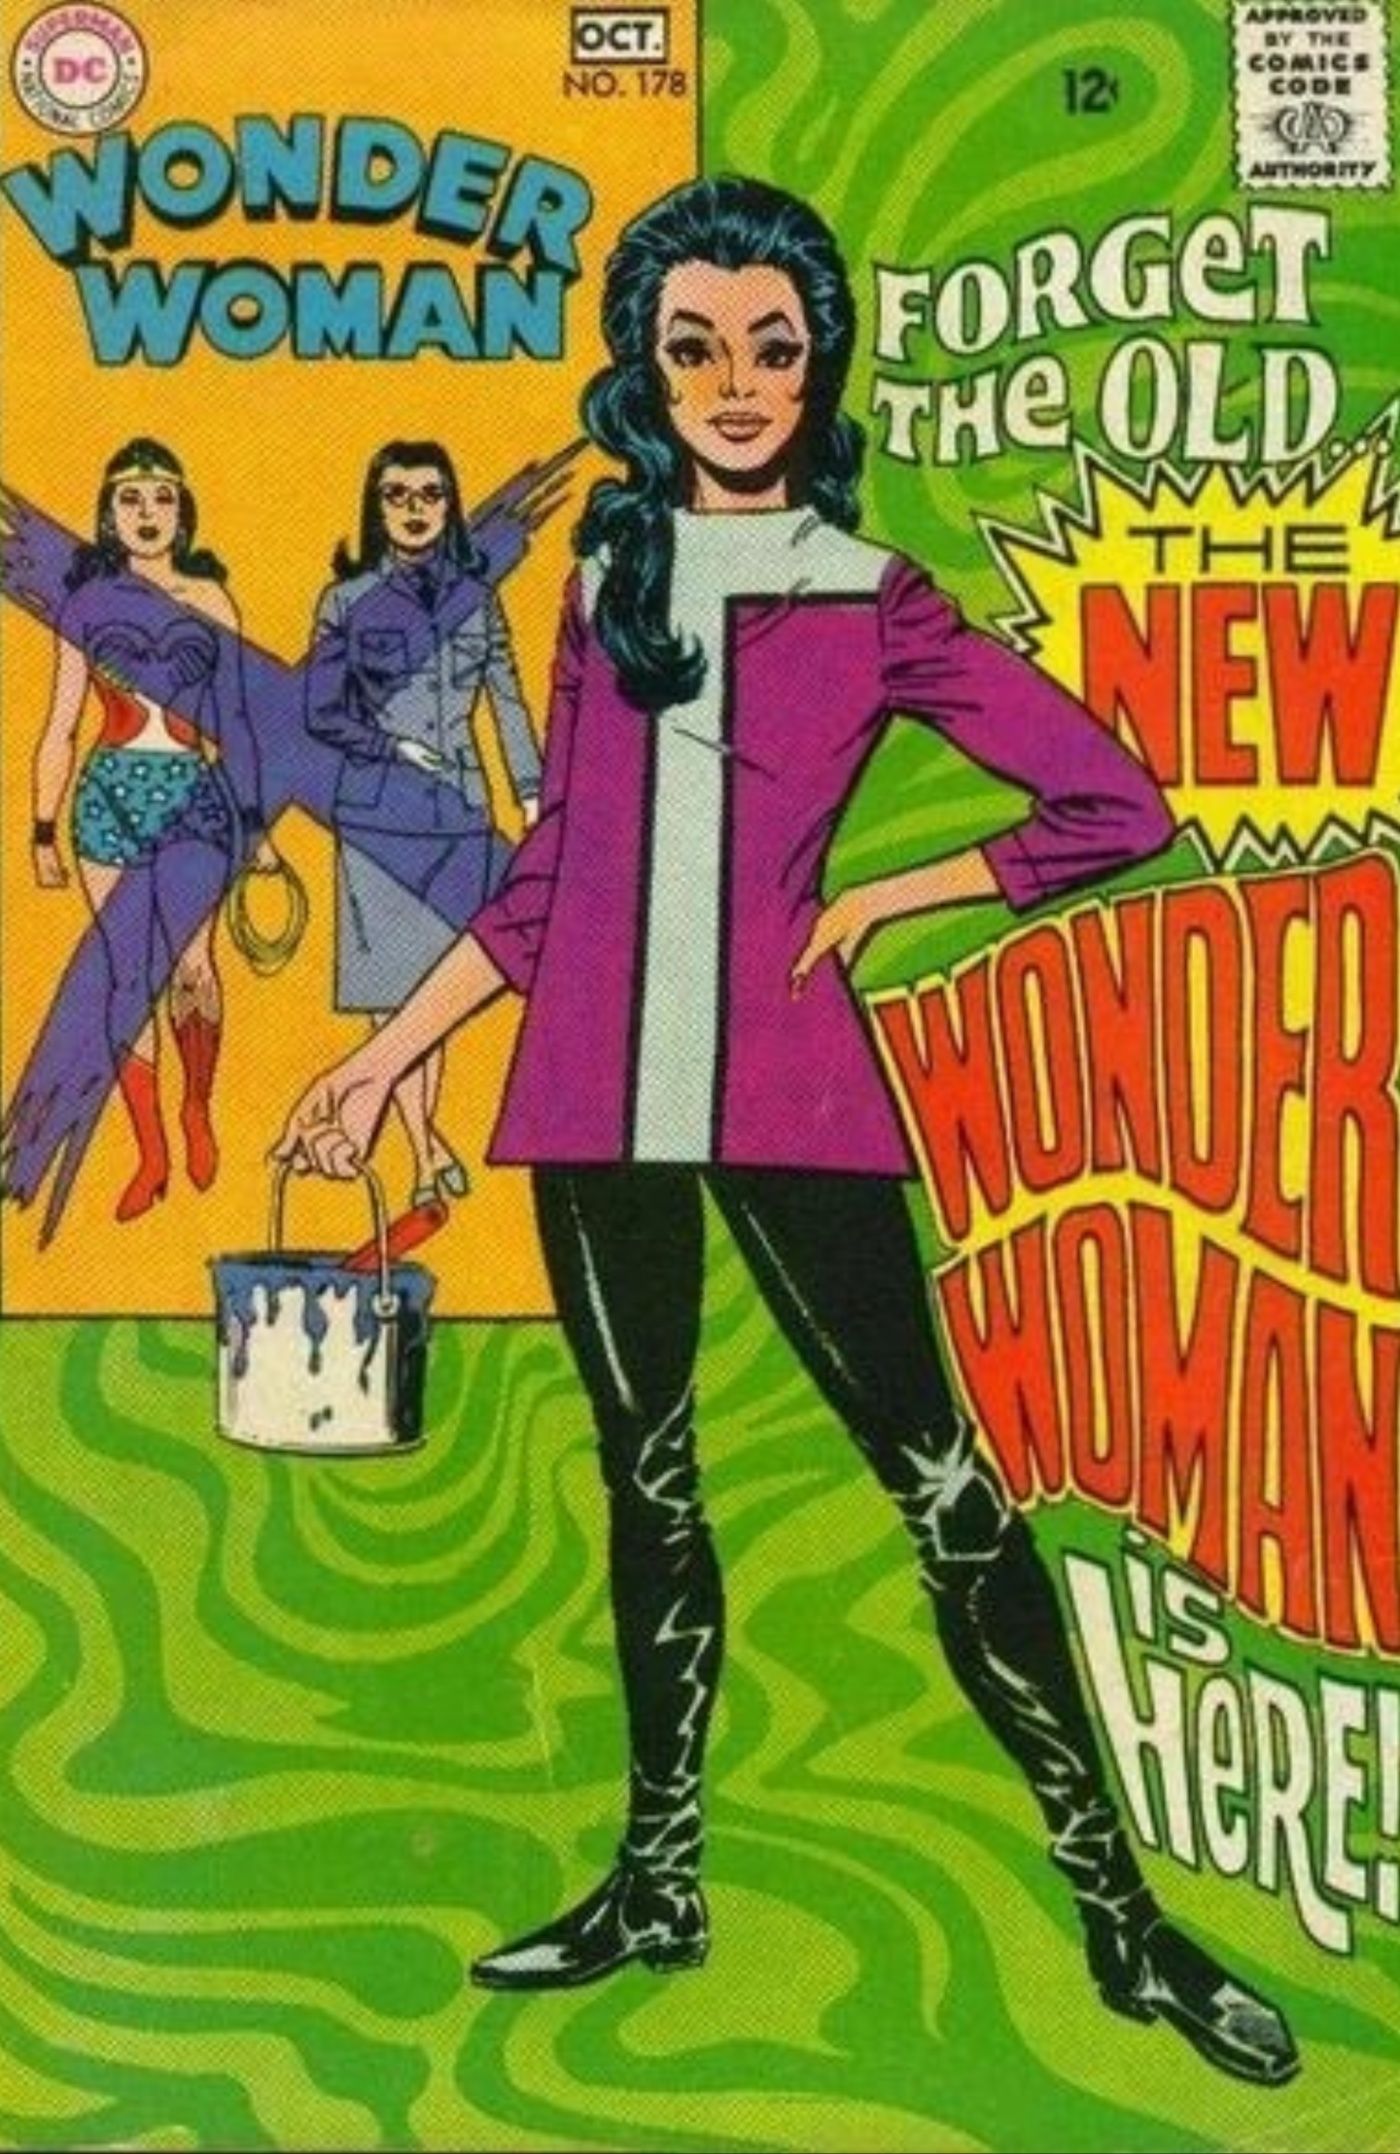 Wonder Woman in mod outfit in 1960s comic